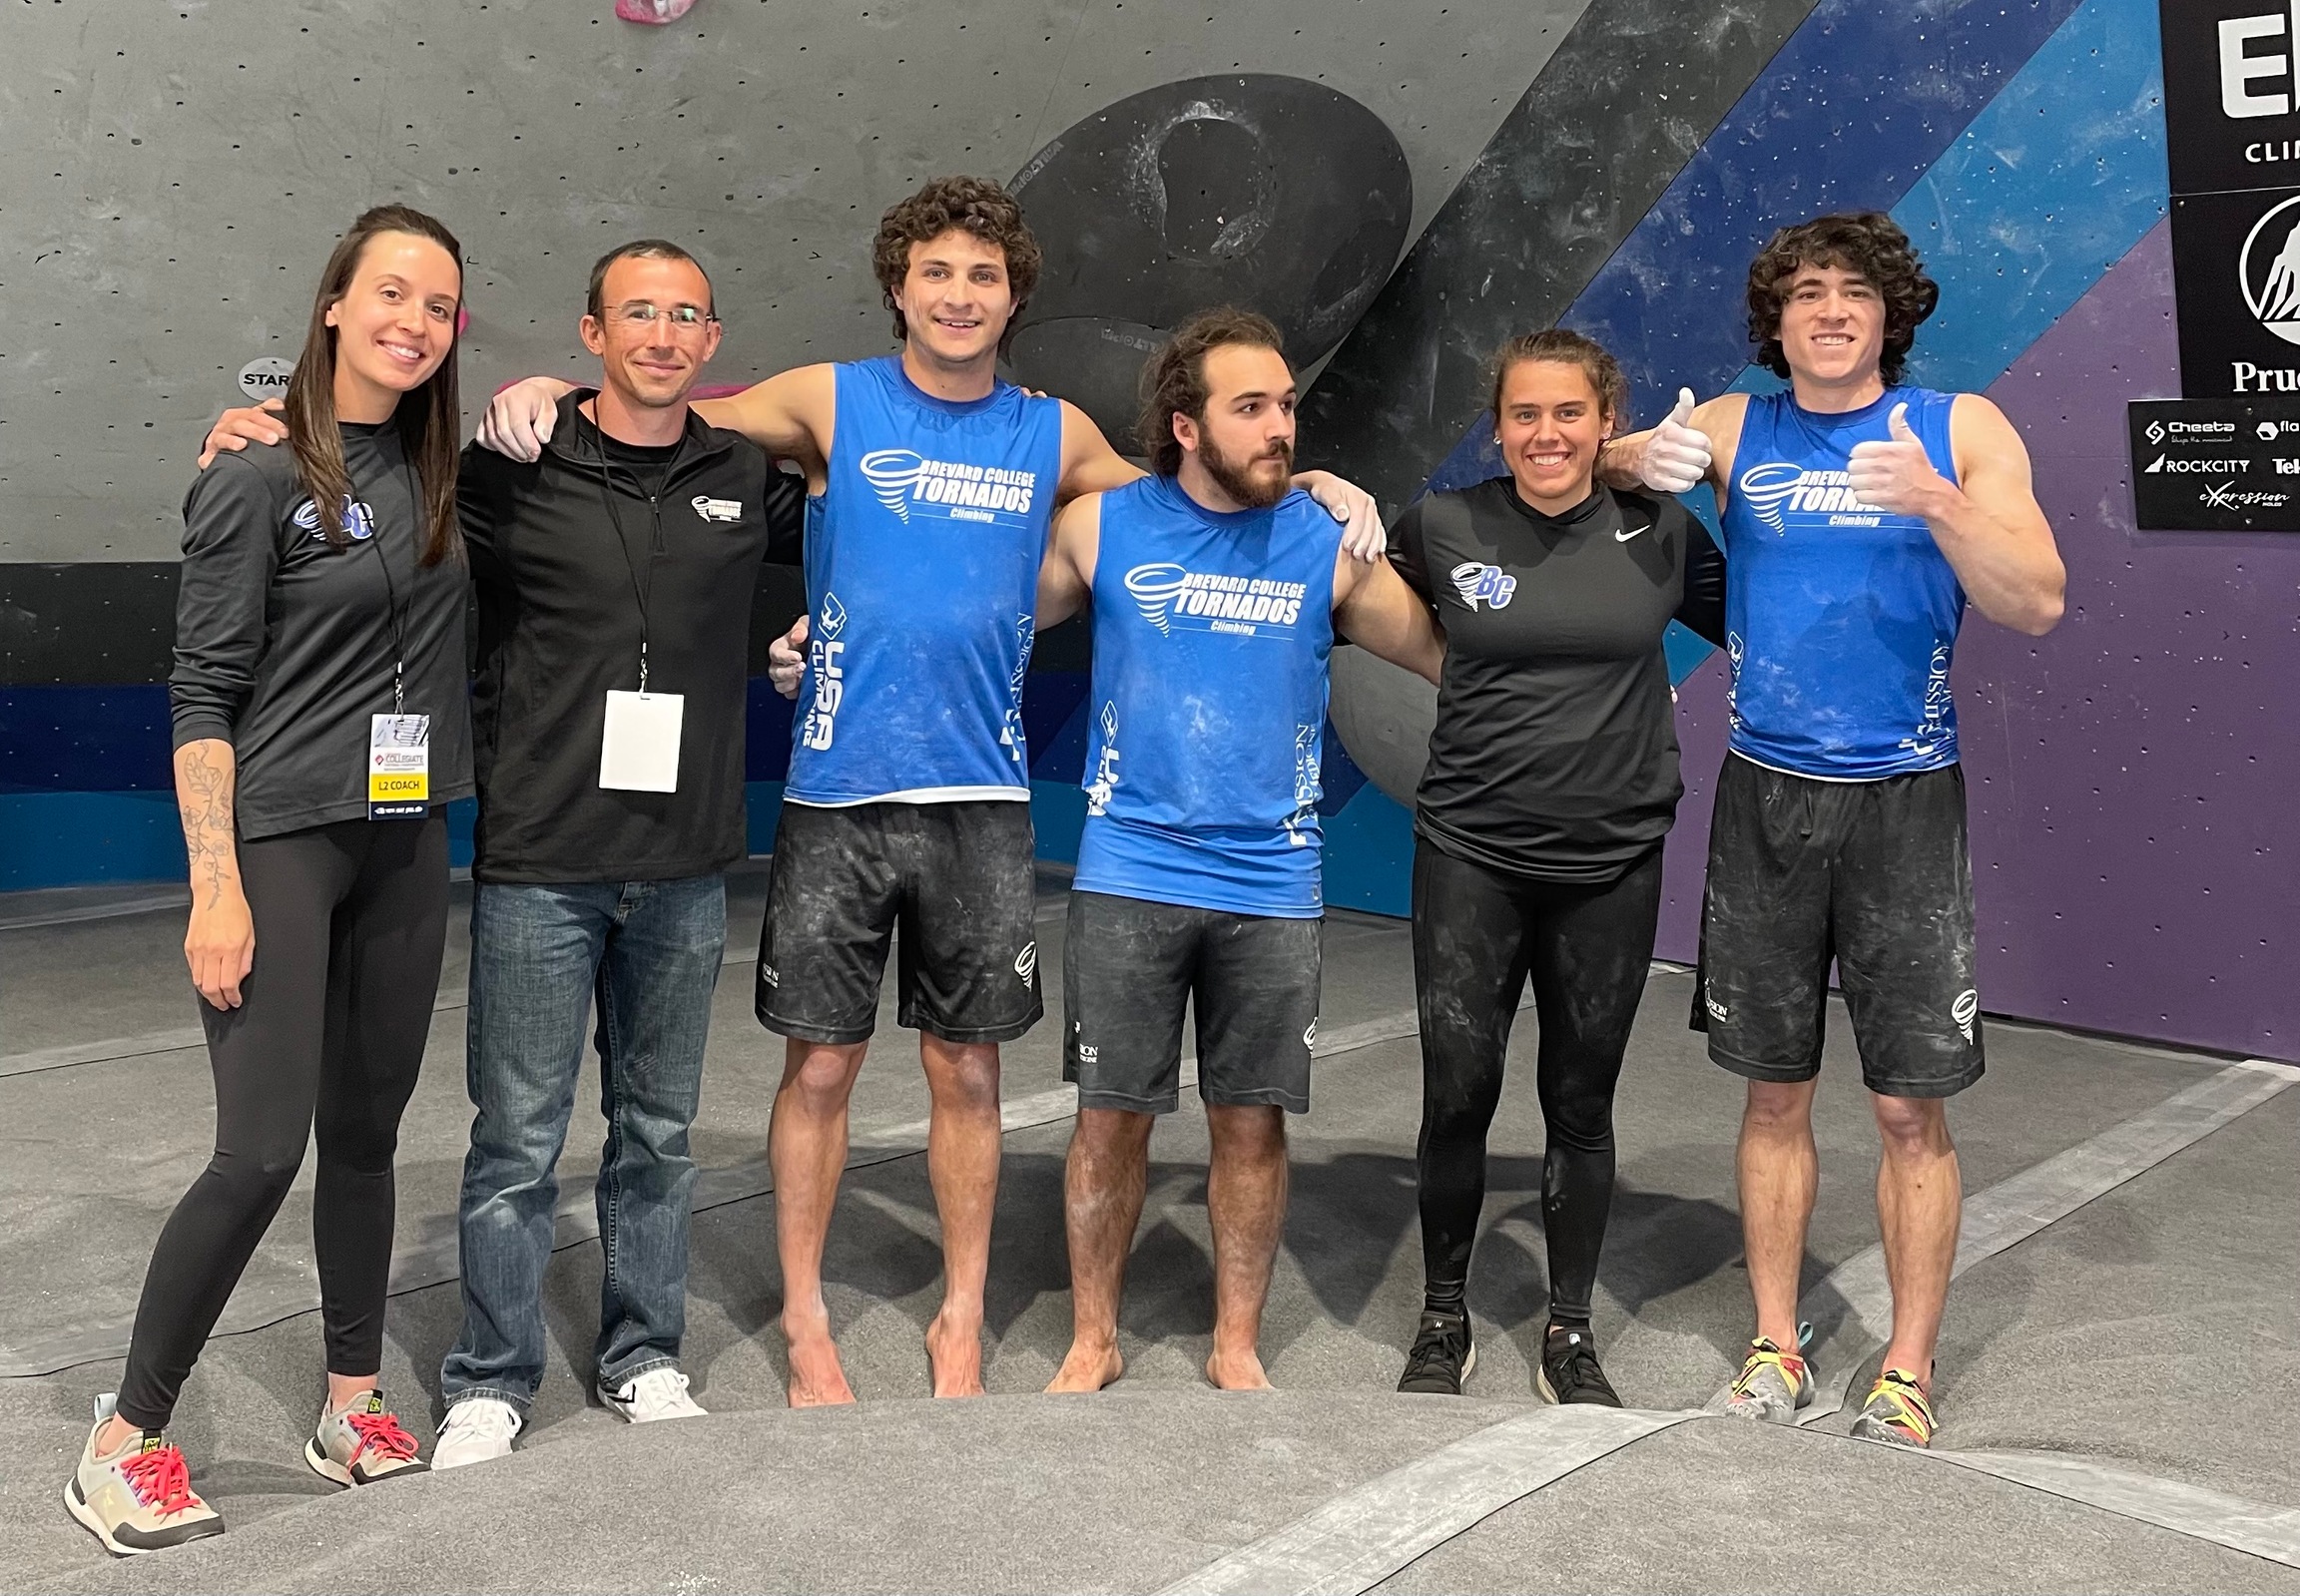 (L-R): Brevard College Assistant Coach Anna Horne, Head Coach Dan Horne, Dawson Jacobs, Kendrick Austin, Madison Altman and Caleb Trent at the USA Climbing National Championships.